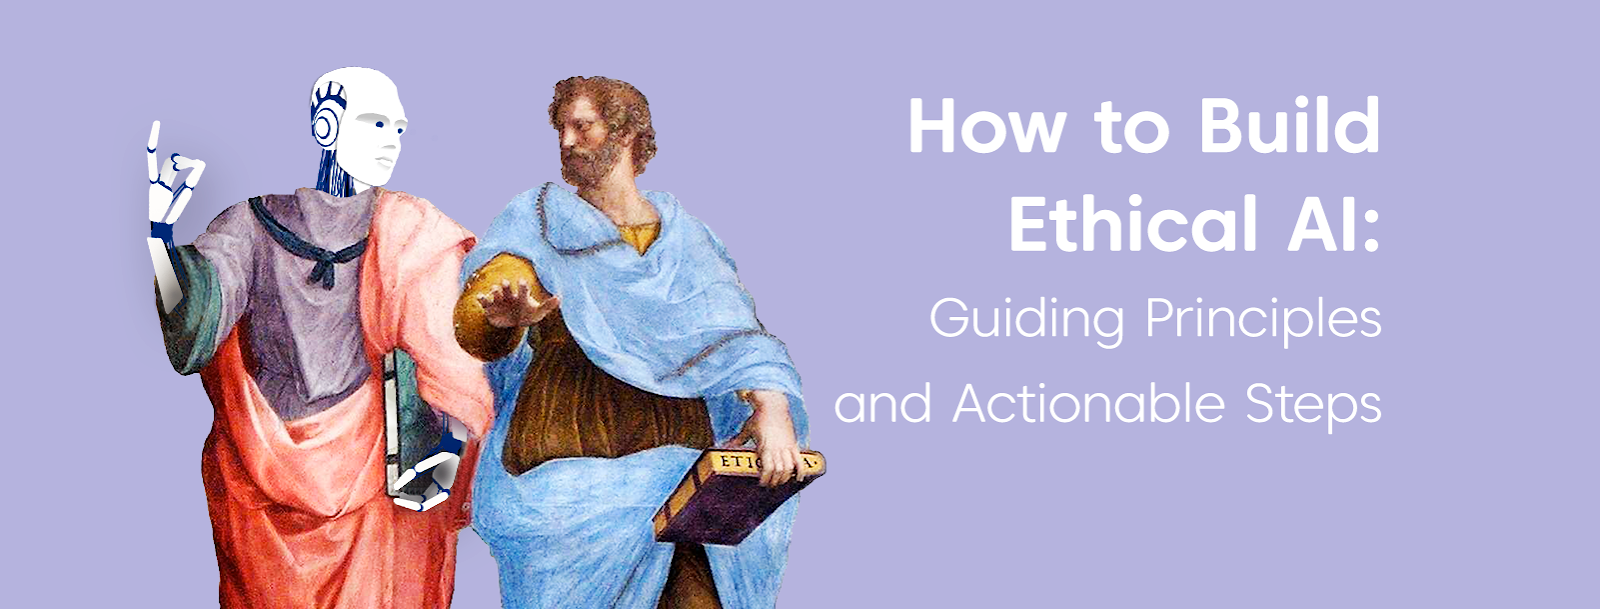 HOW TO BUILD ETHICAL AI: GUIDING PRINCIPLES AND ACTIONABLE STEPS